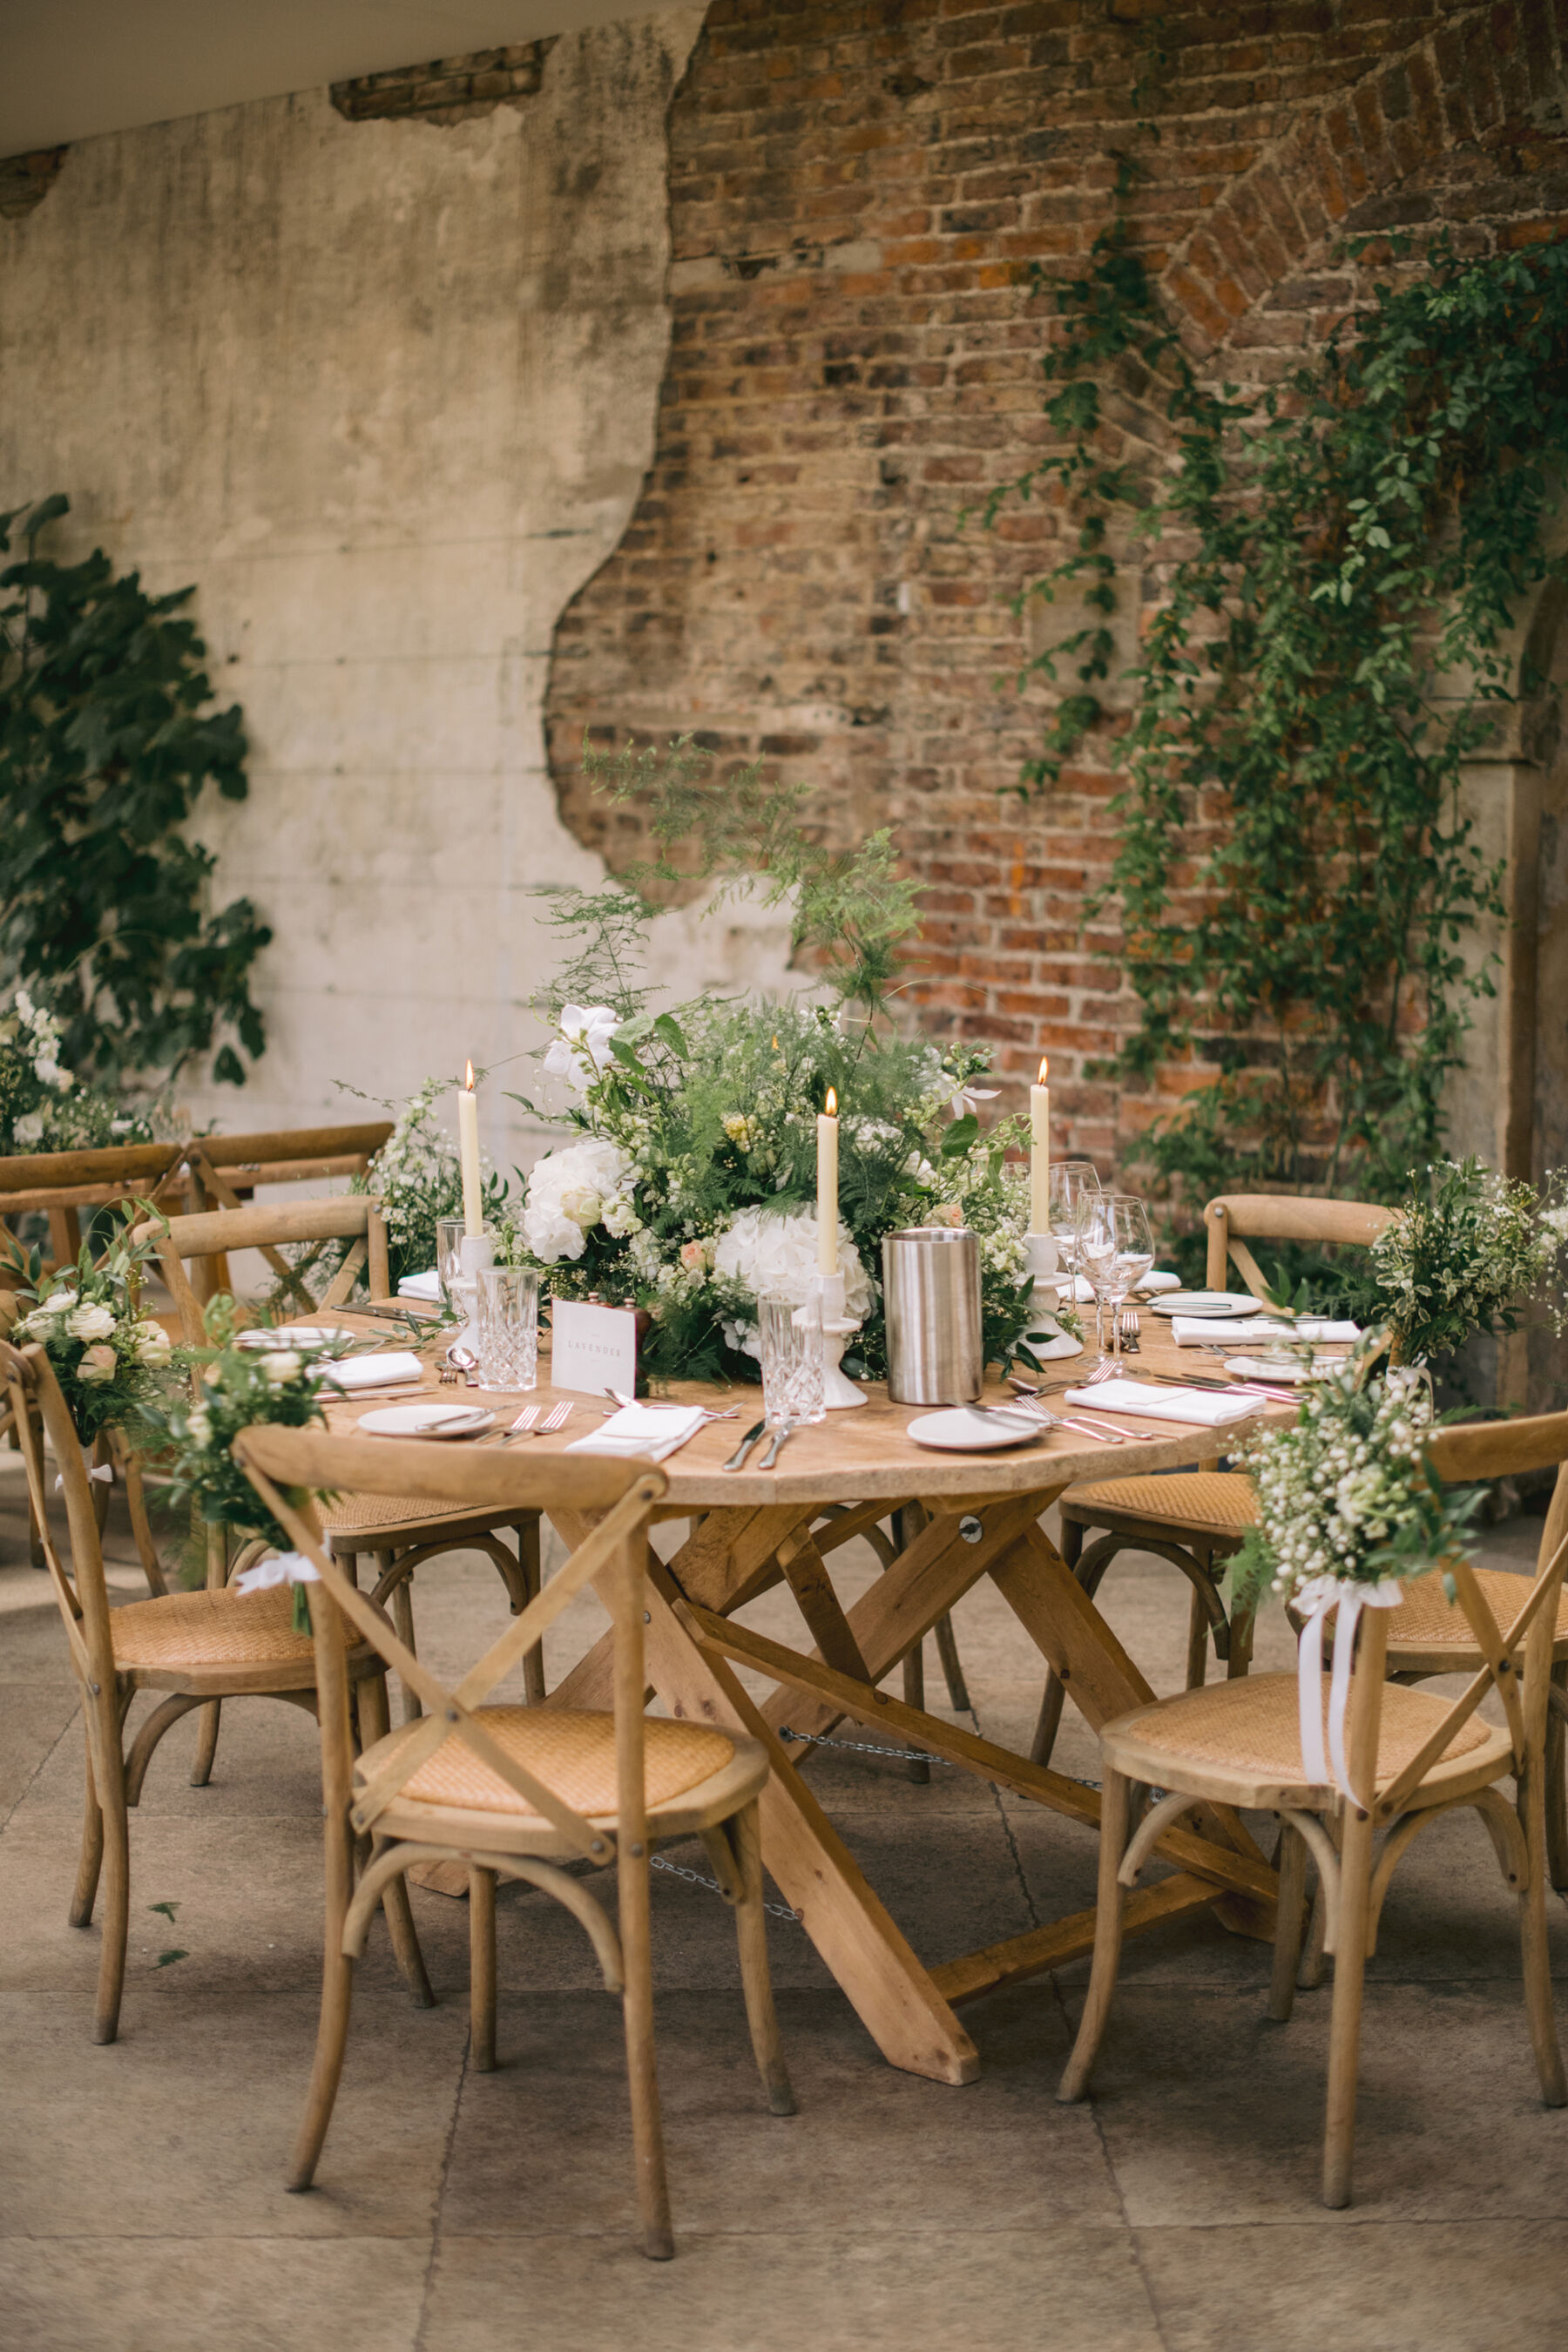 Elegant pared back wedding table decor with seasonal summer flowers and greenery. Wooden crossback chairs.